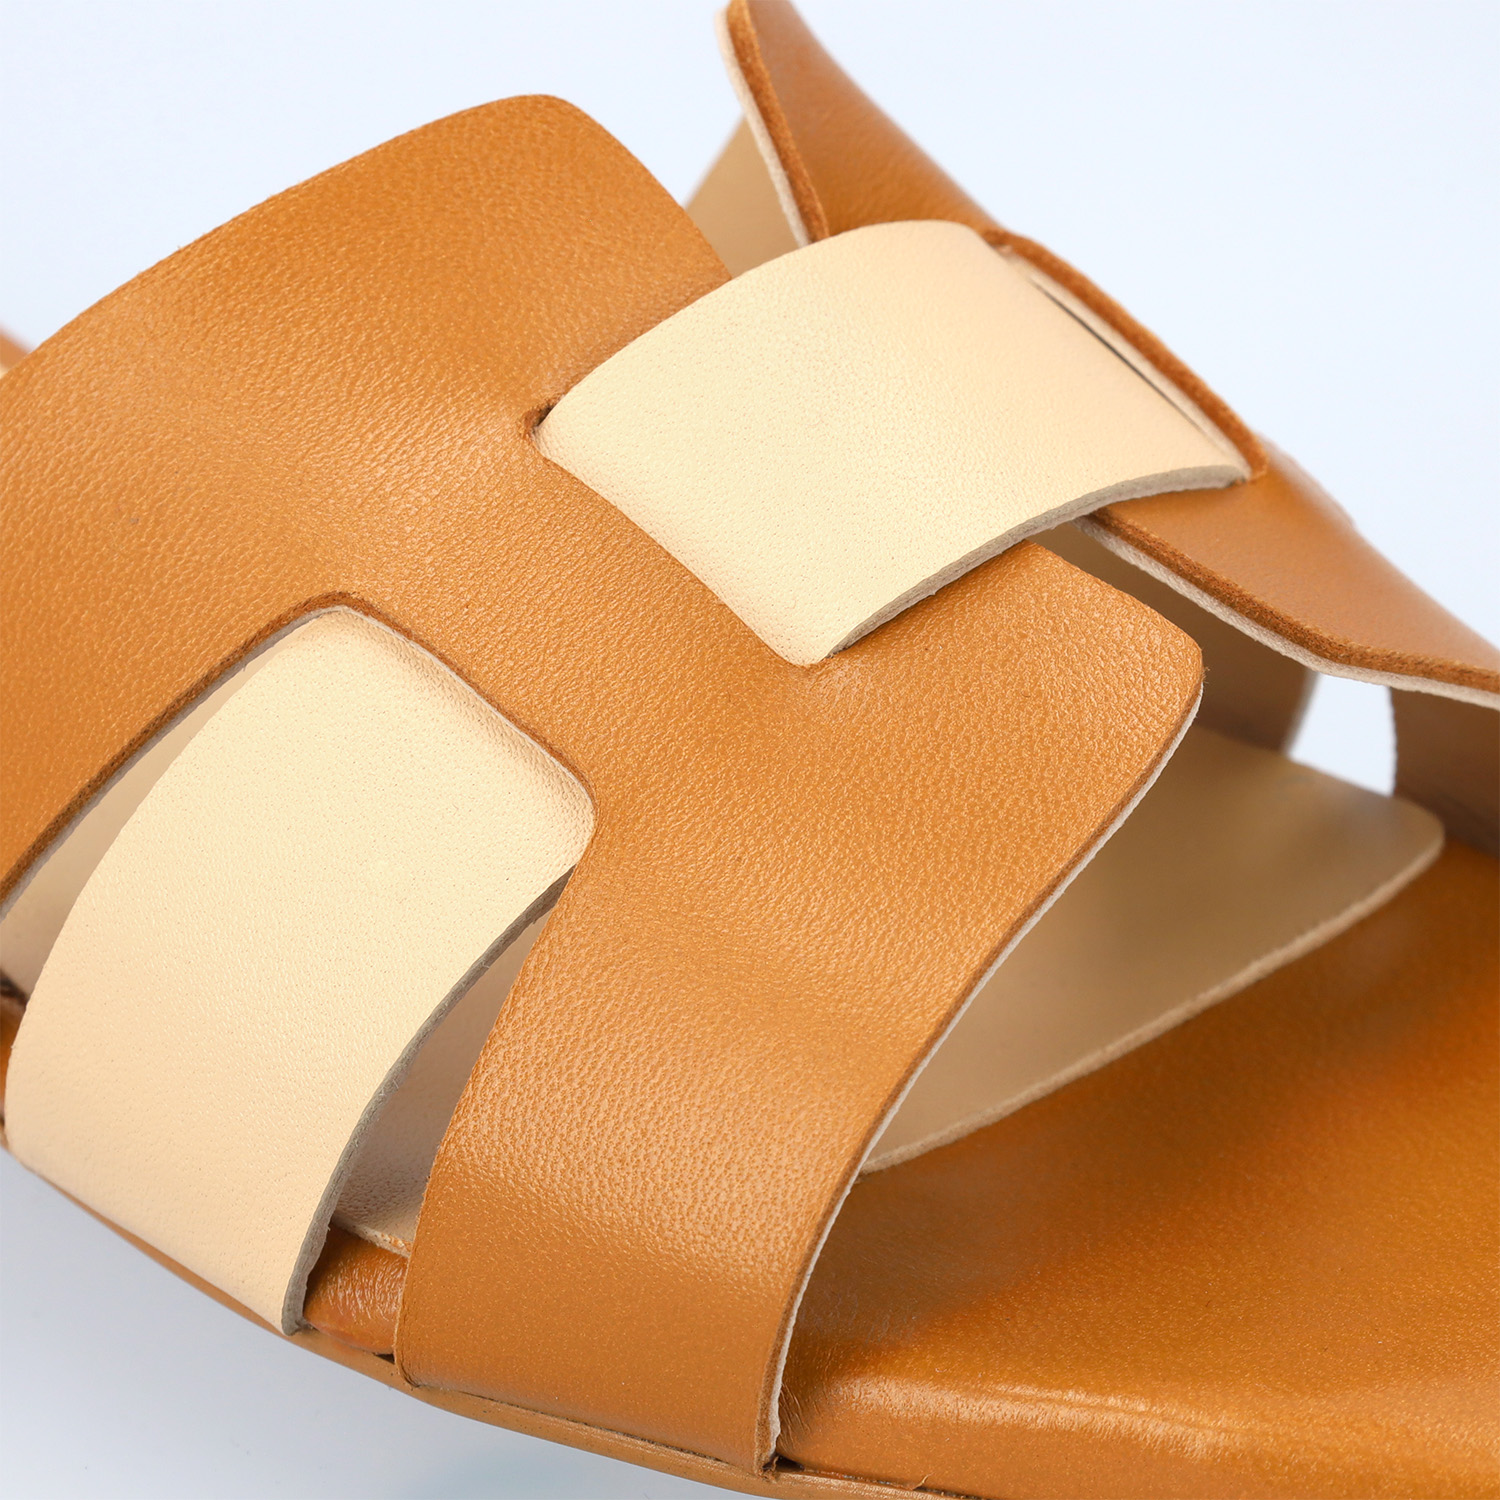 Flat sandals in brown and beige leather 